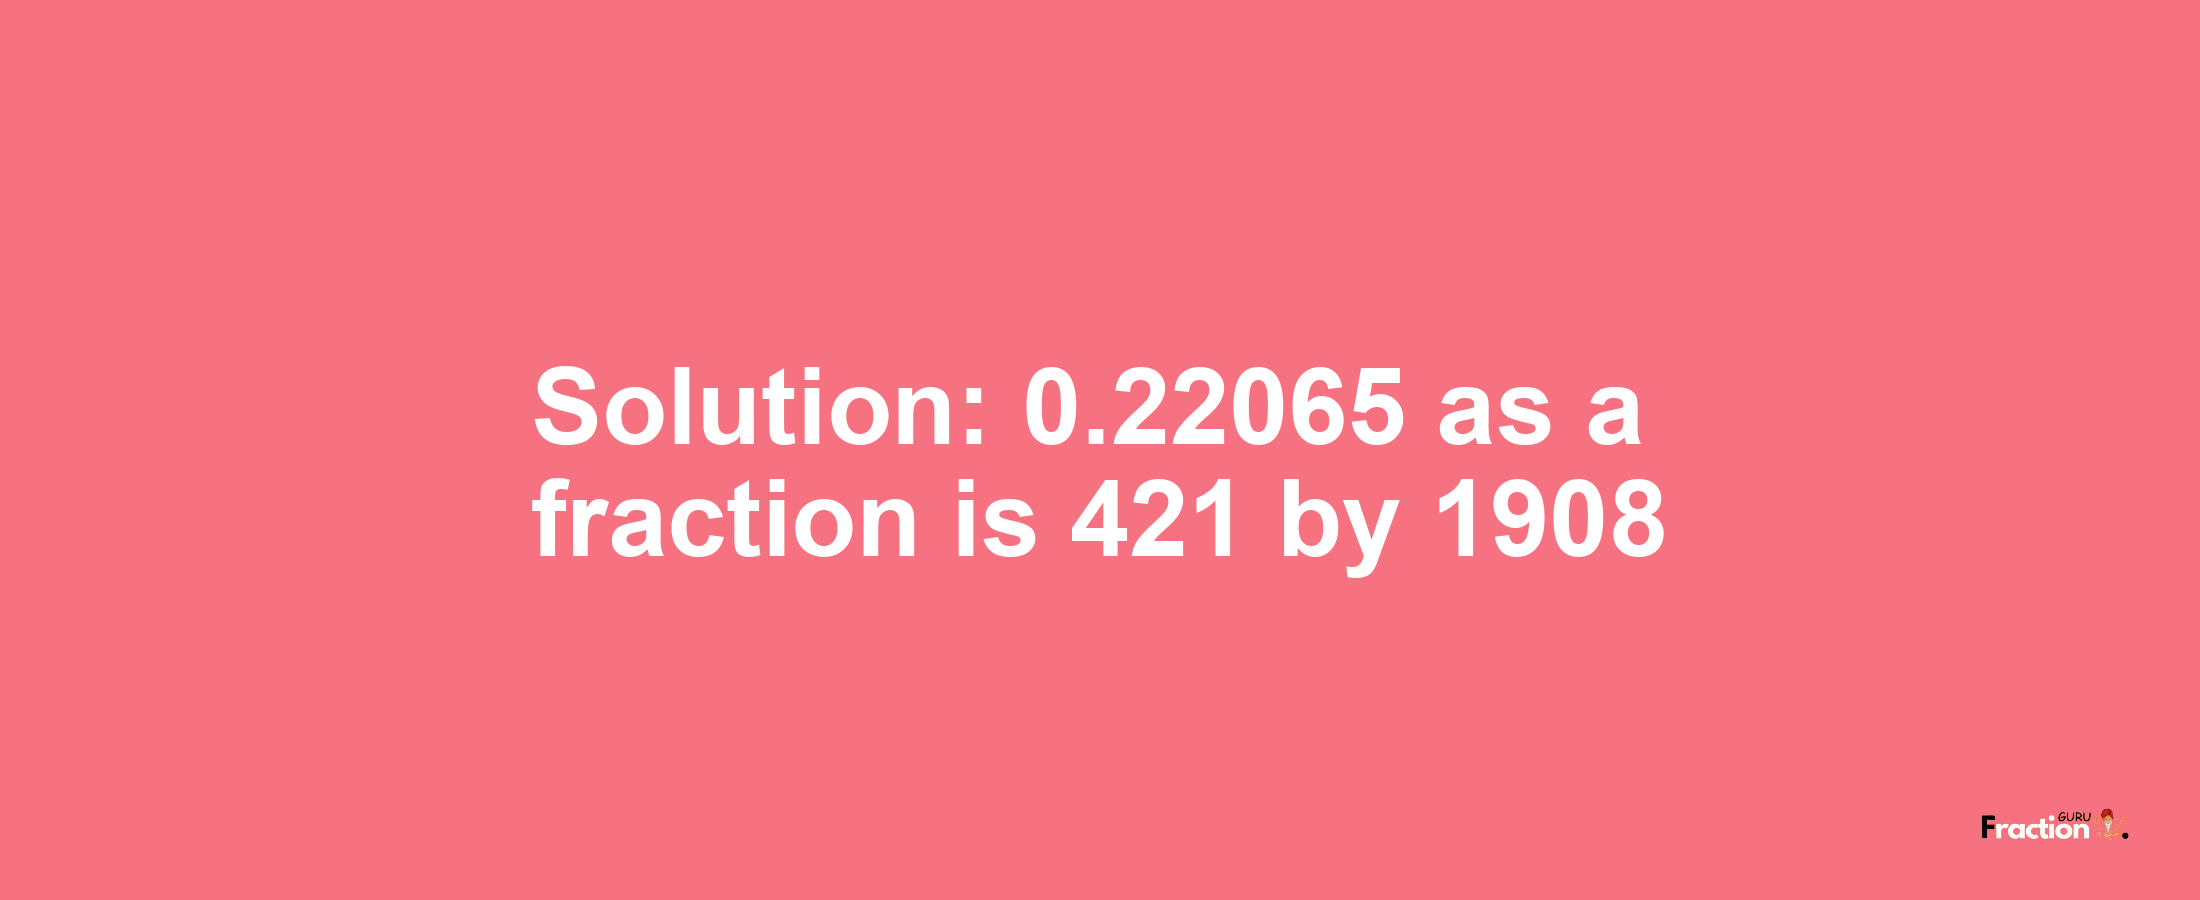 Solution:0.22065 as a fraction is 421/1908